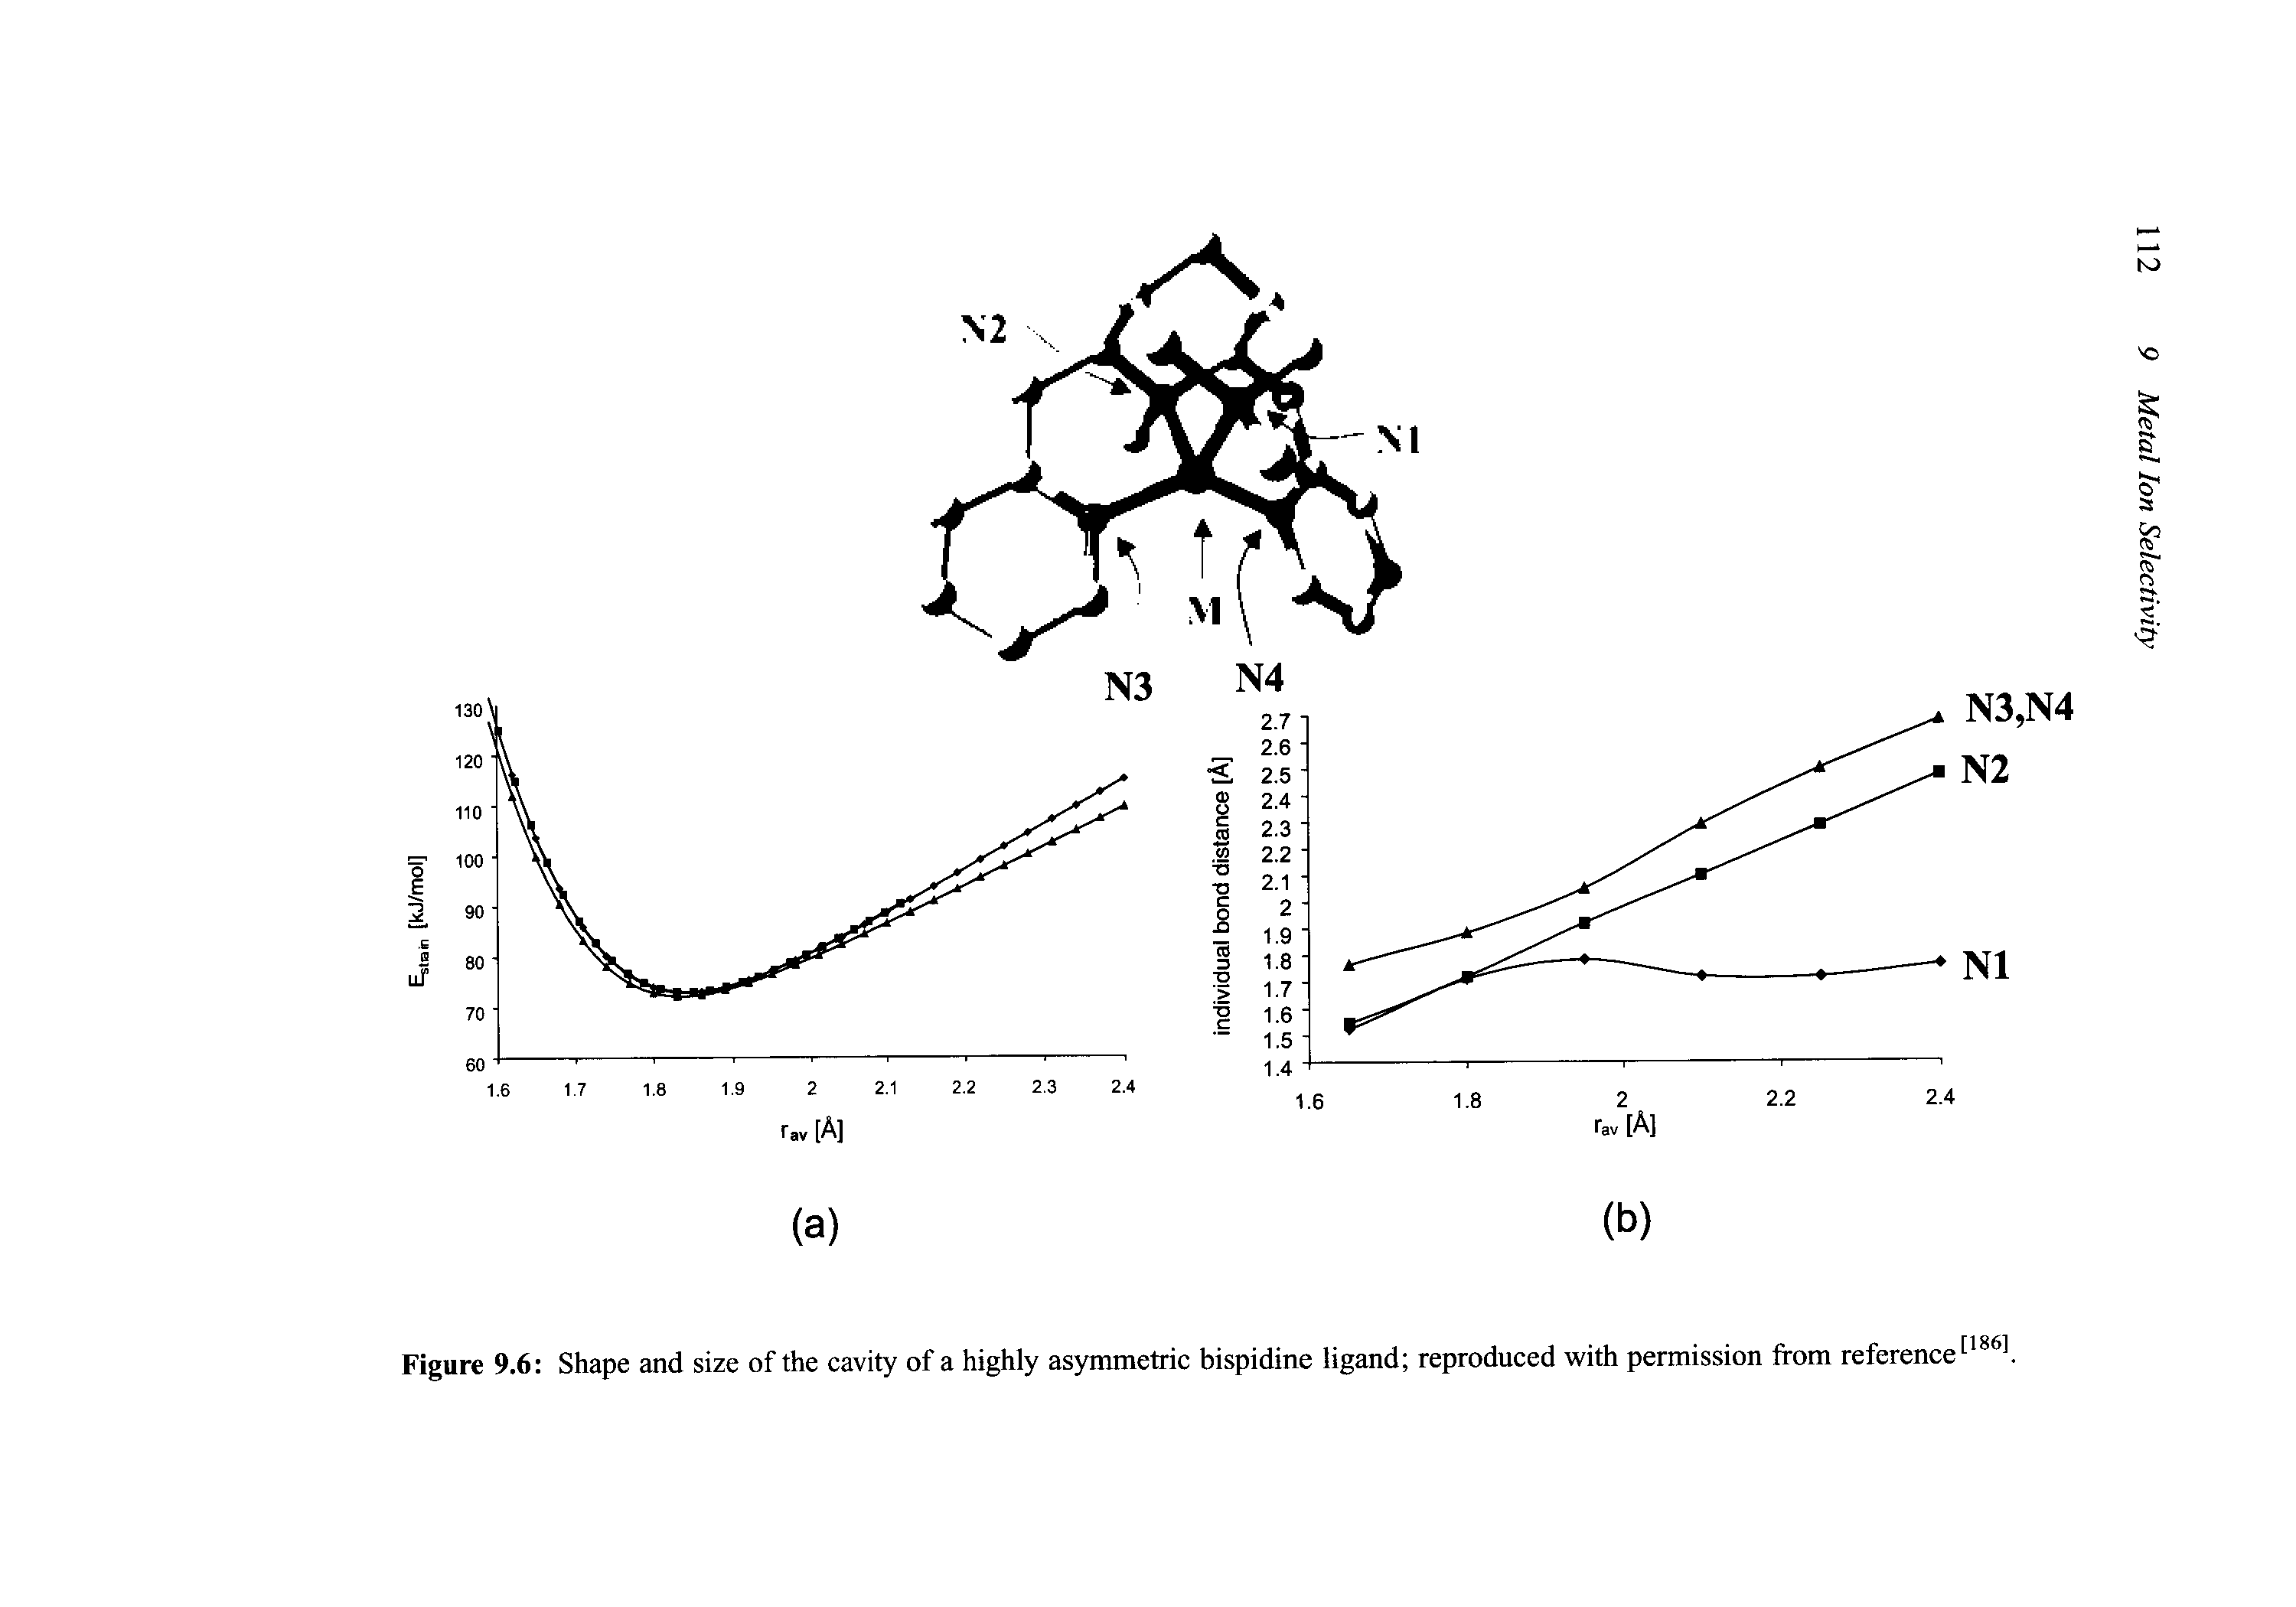 Figure 9.6 Shape and size of the cavity of a highly asymmetric bispidine ligand reproduced with permission from reference[1861.